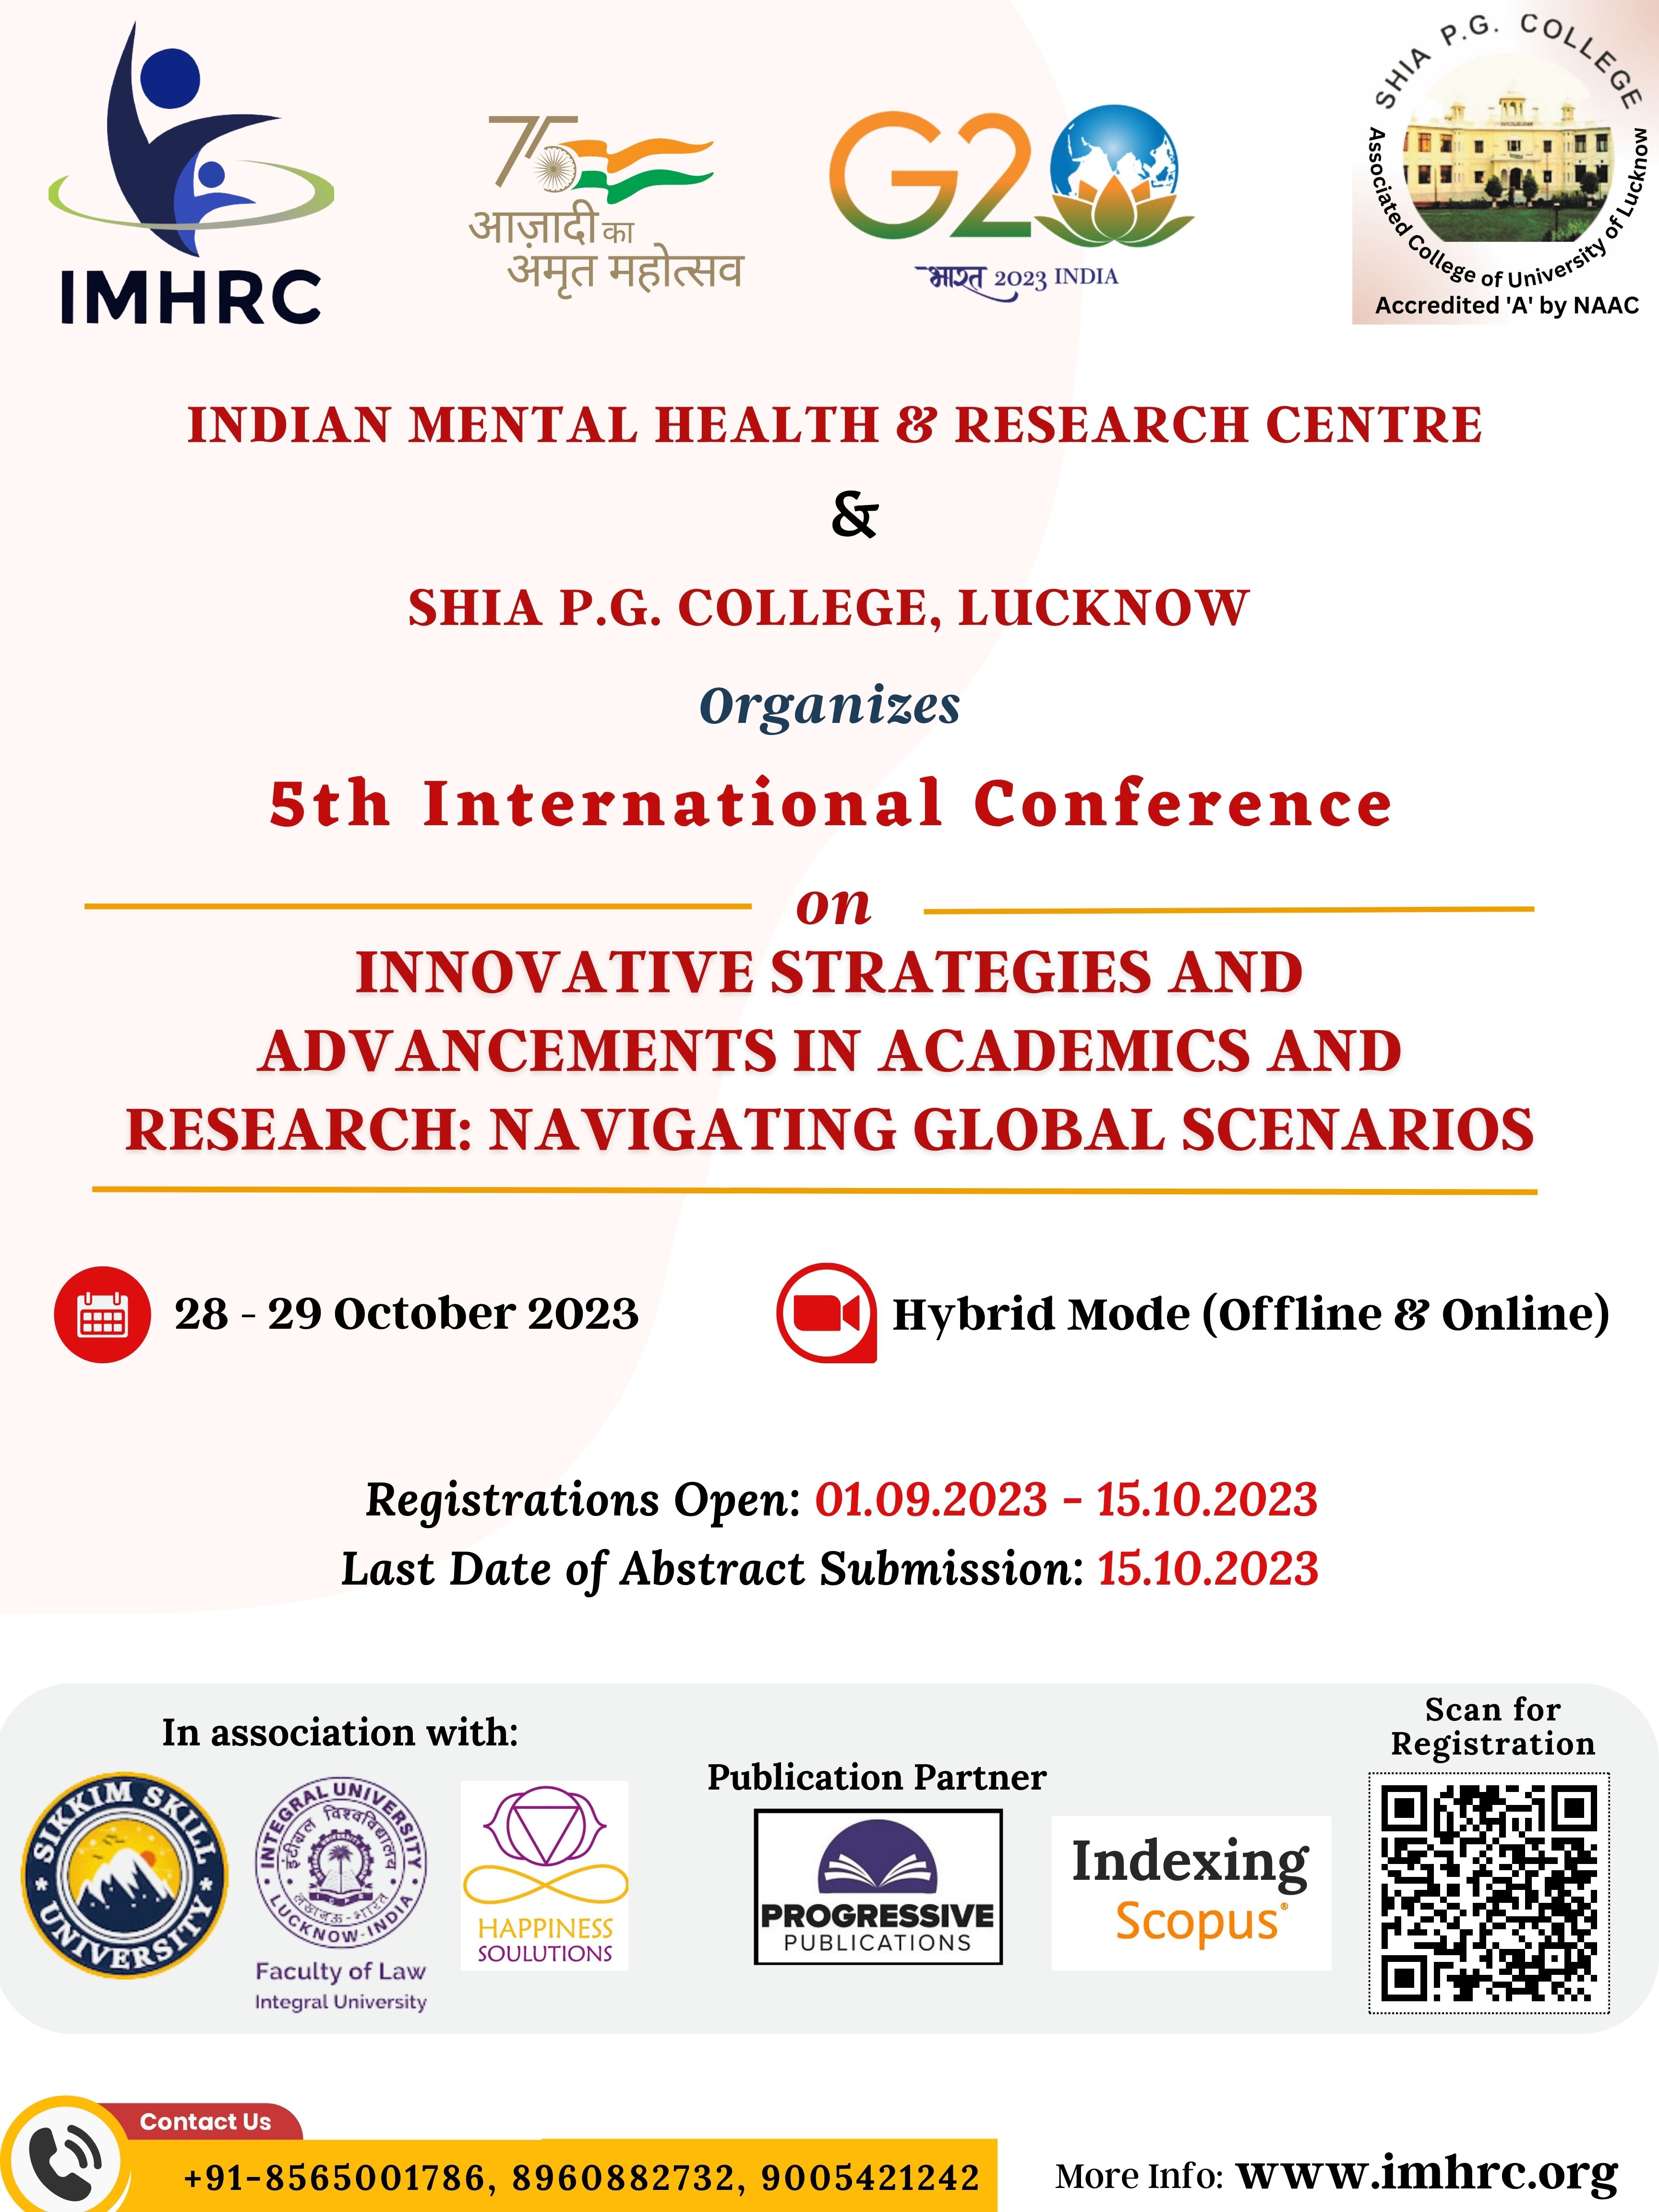 5th International Conference of IMHRC